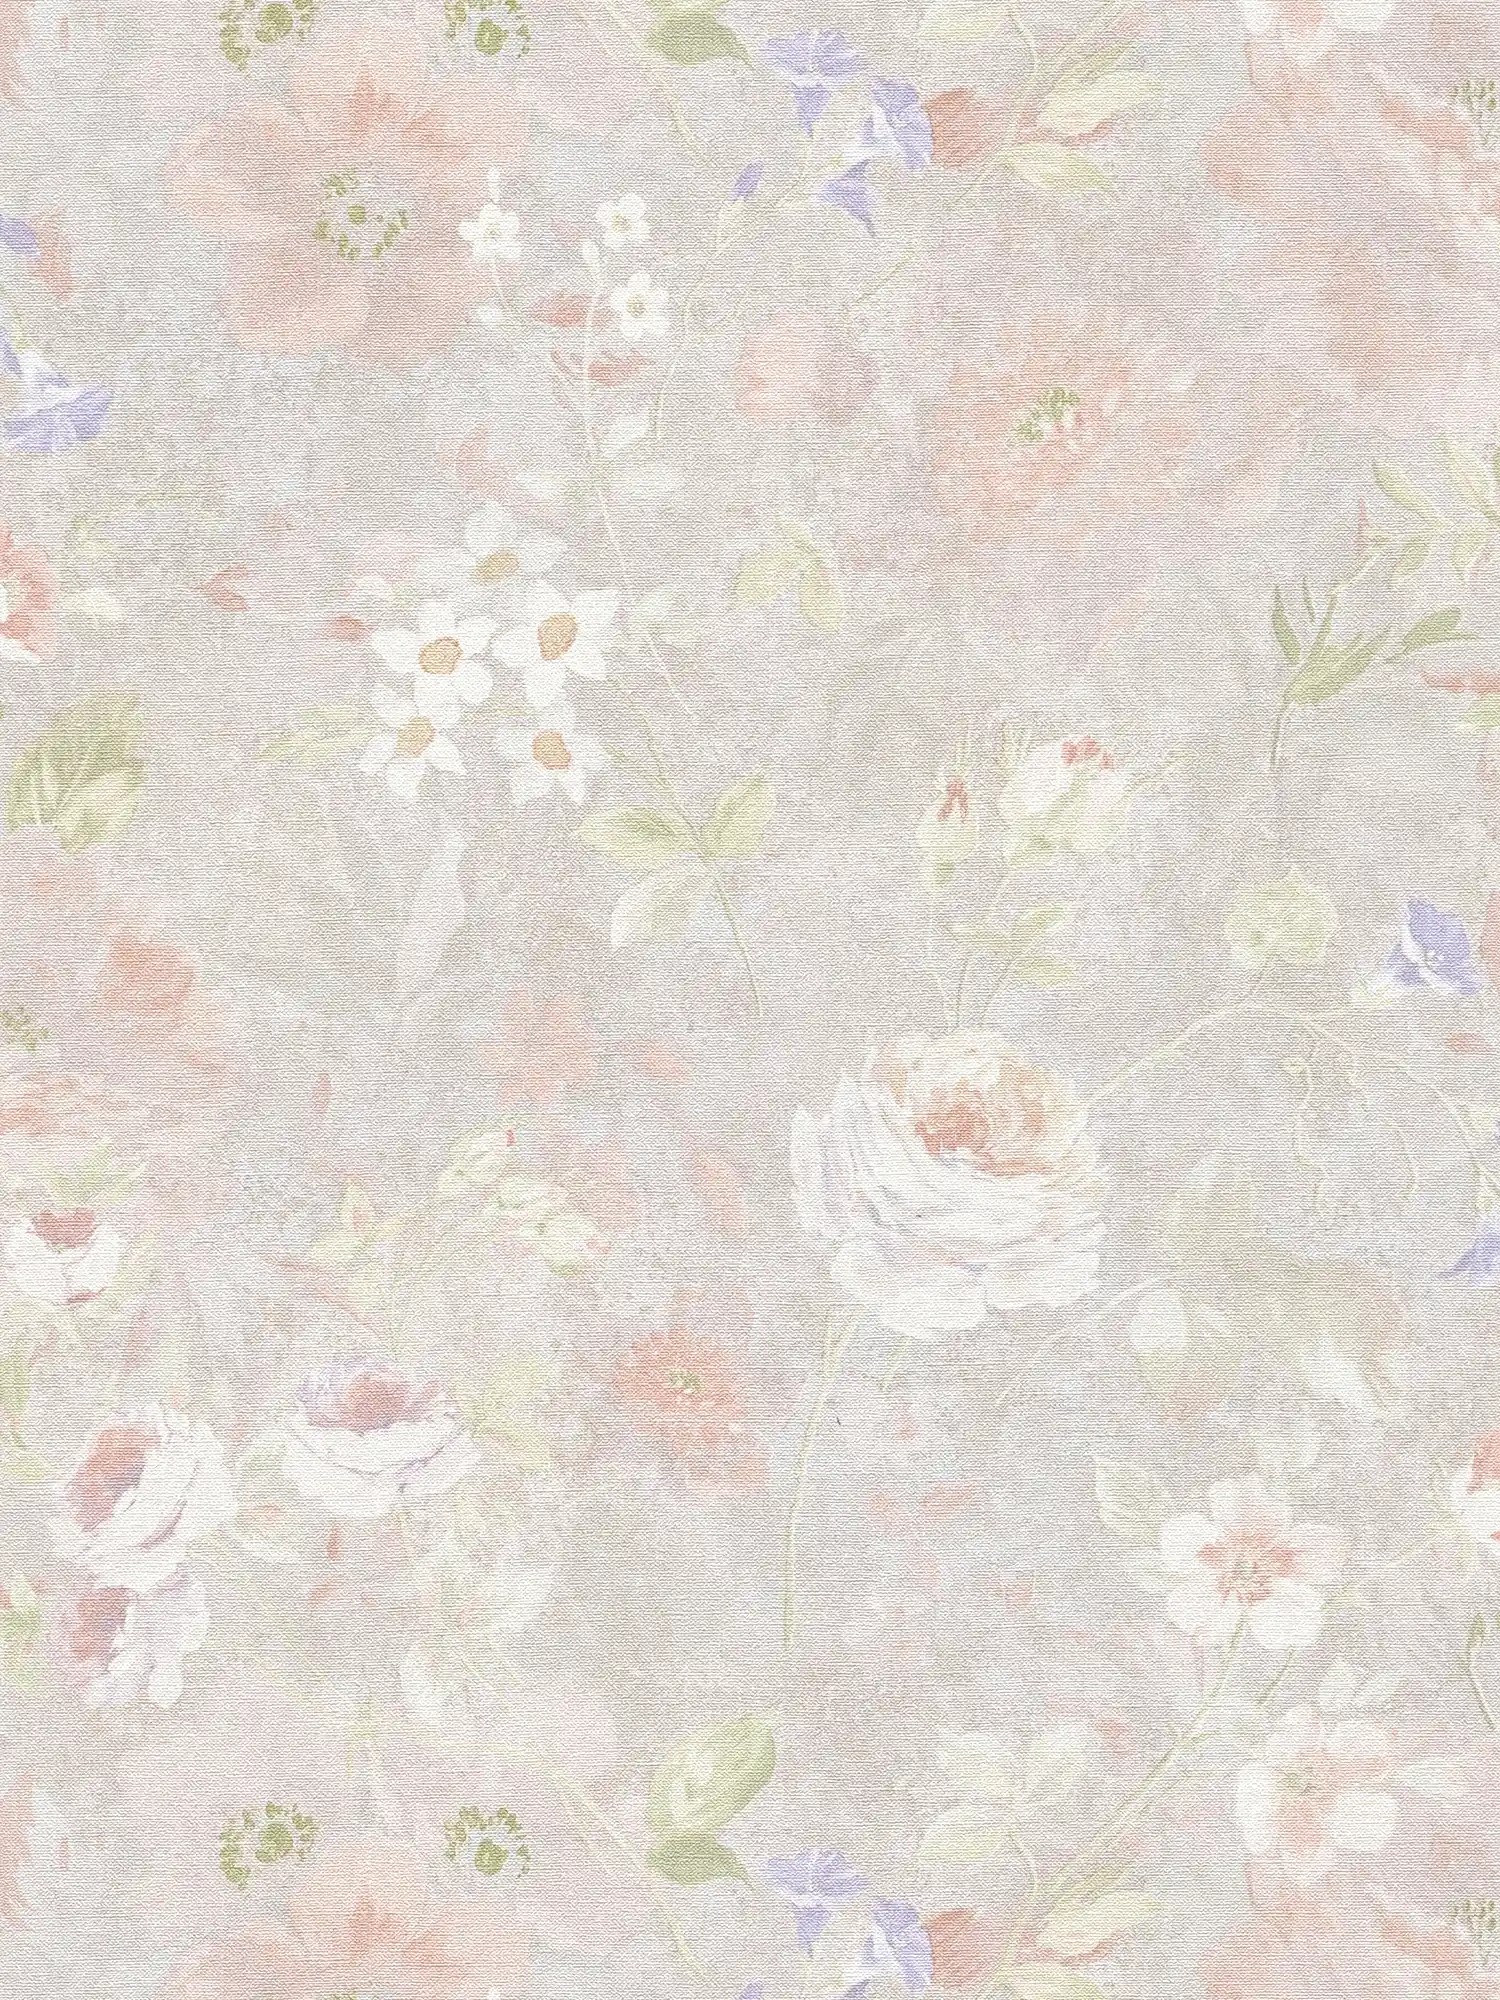 Flower wallpaper painted pattern PVC-free - grey, multicoloured, pink
